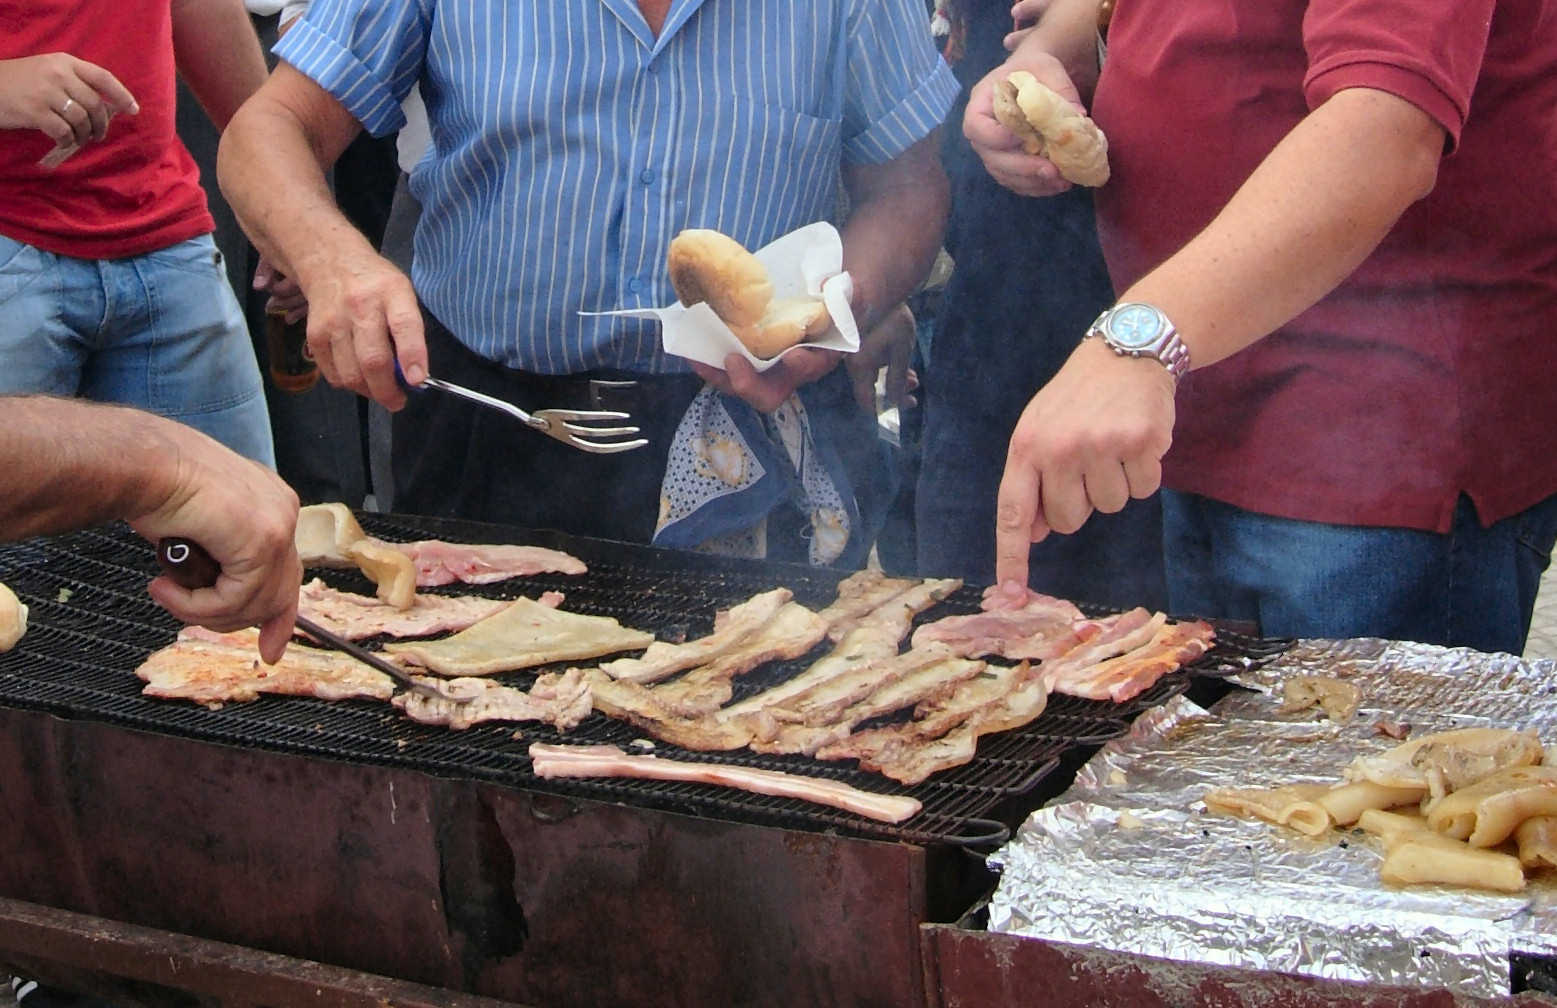 two men standing near a grill getting food on the grill